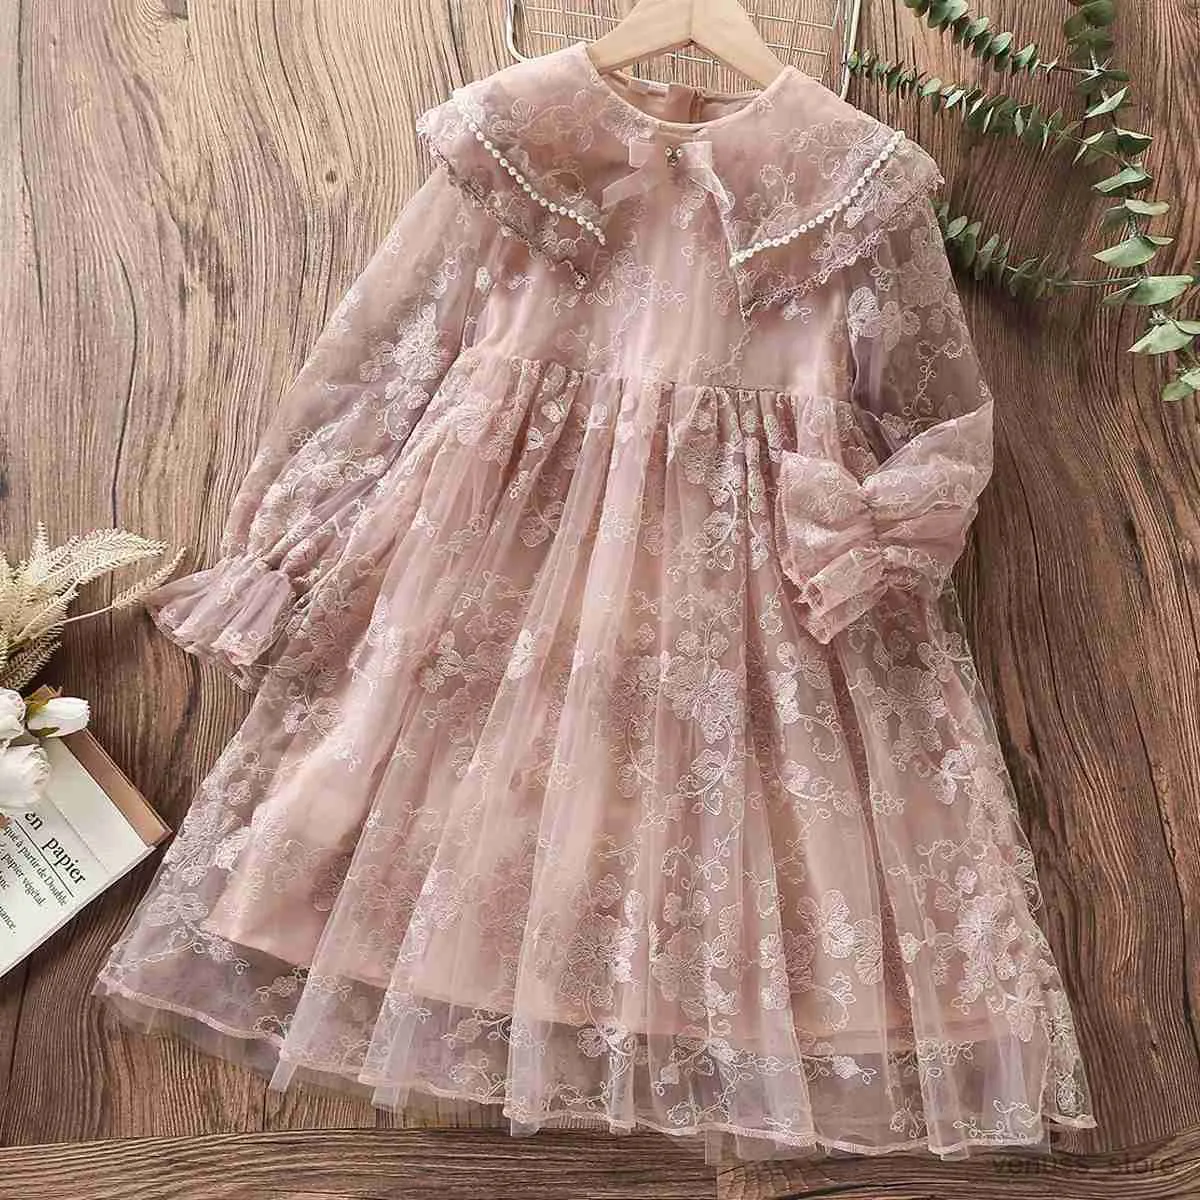 Girl Dresses Lace Baby Dress 2 3 4 5 6 Years Girls Birthday Vestido Bebes  Party Princess For Infants From 9,94 € | DHgate